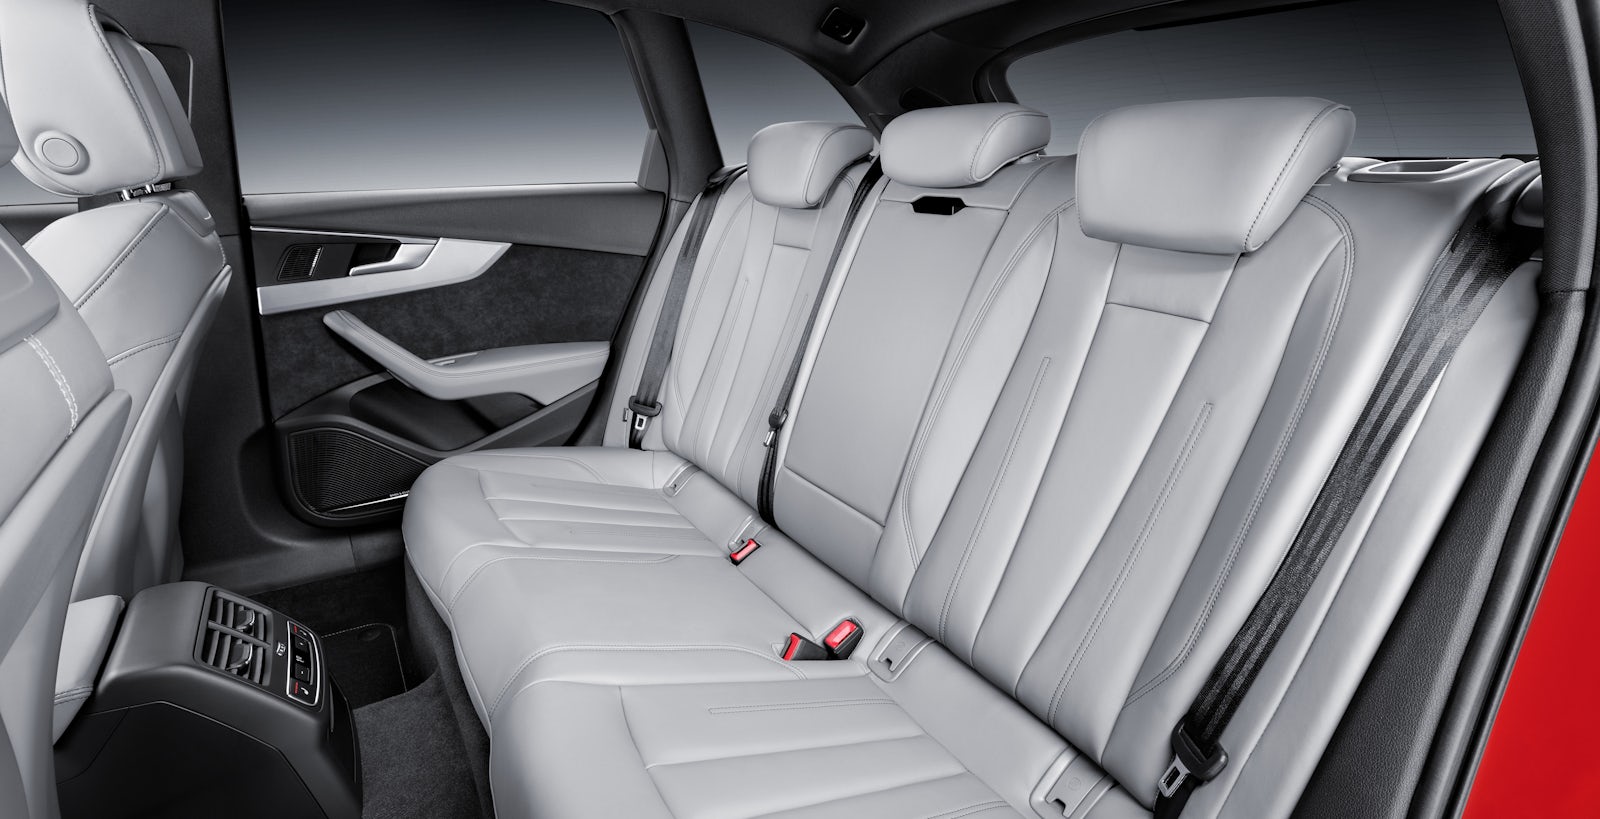 Audi A4 sizes, dimensions & legroom guide carwow